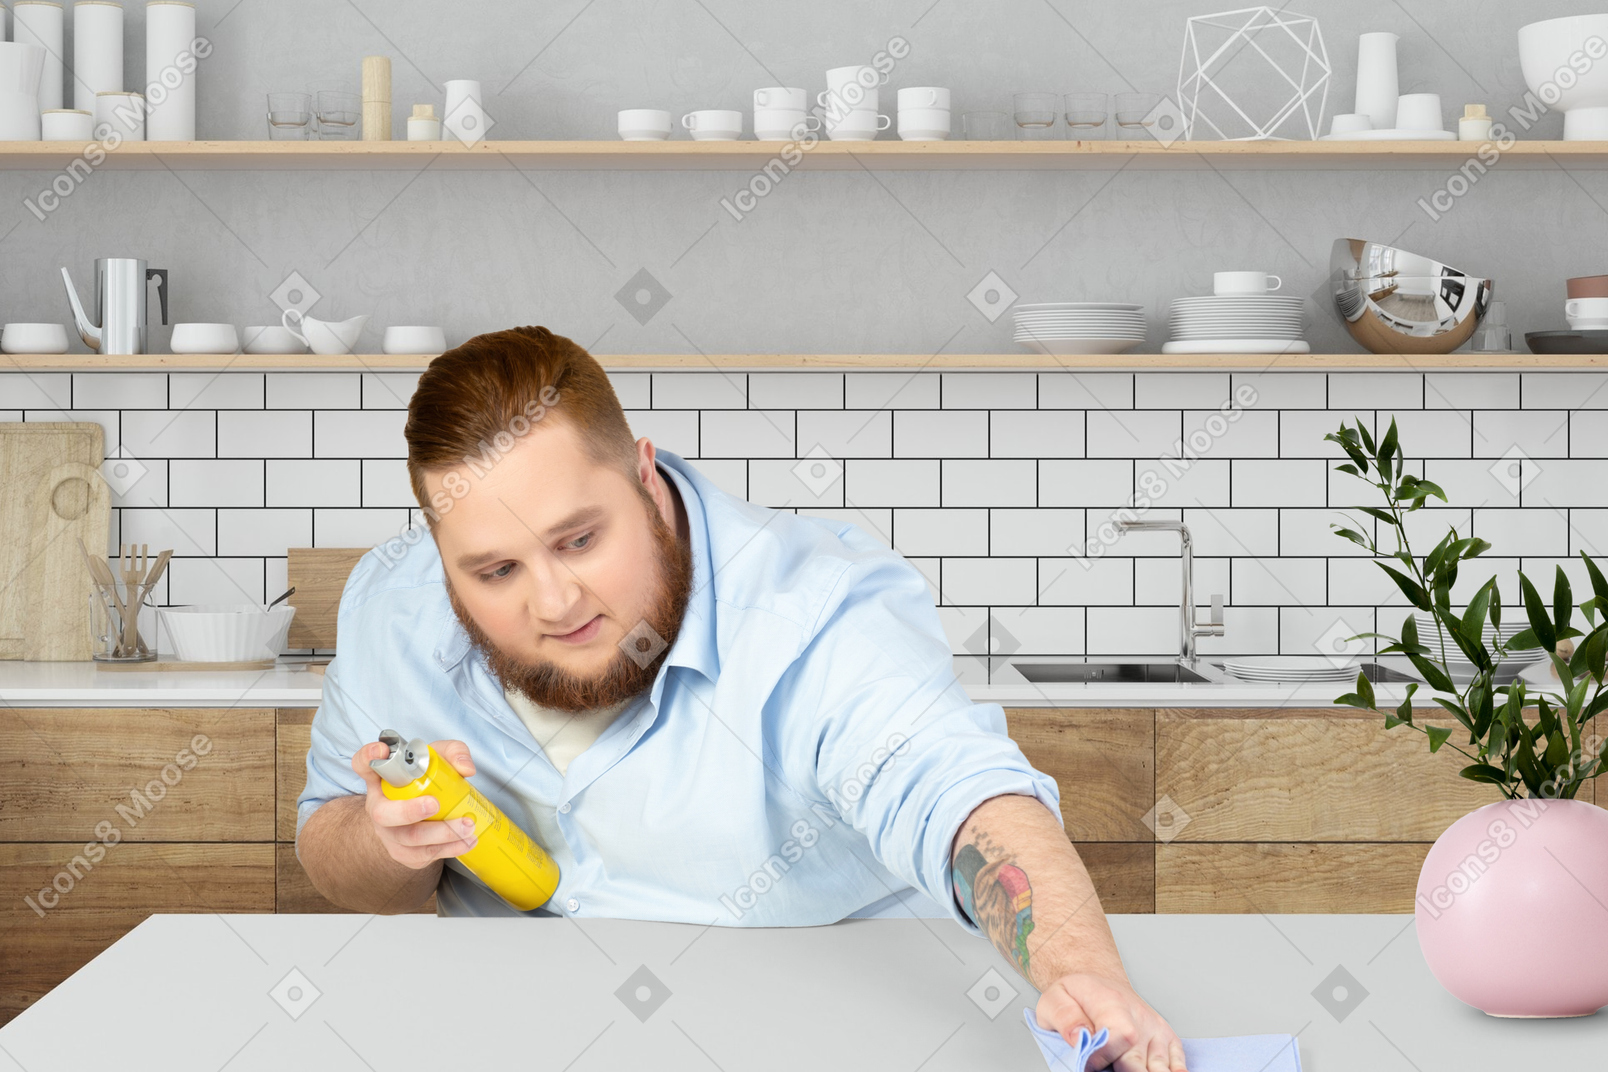 A man in a blue shirt is cleaning a table